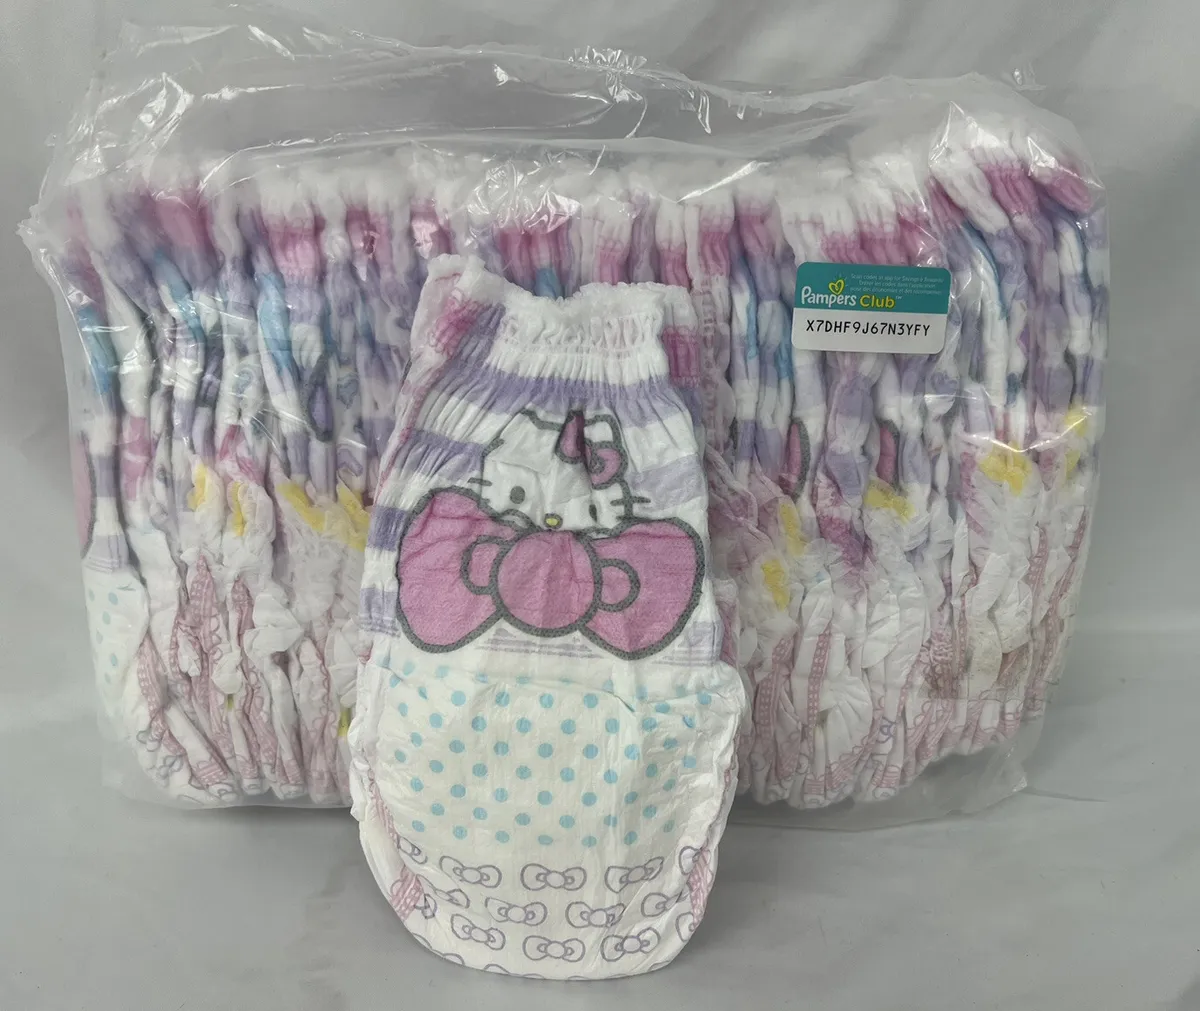 pampers hello kitty